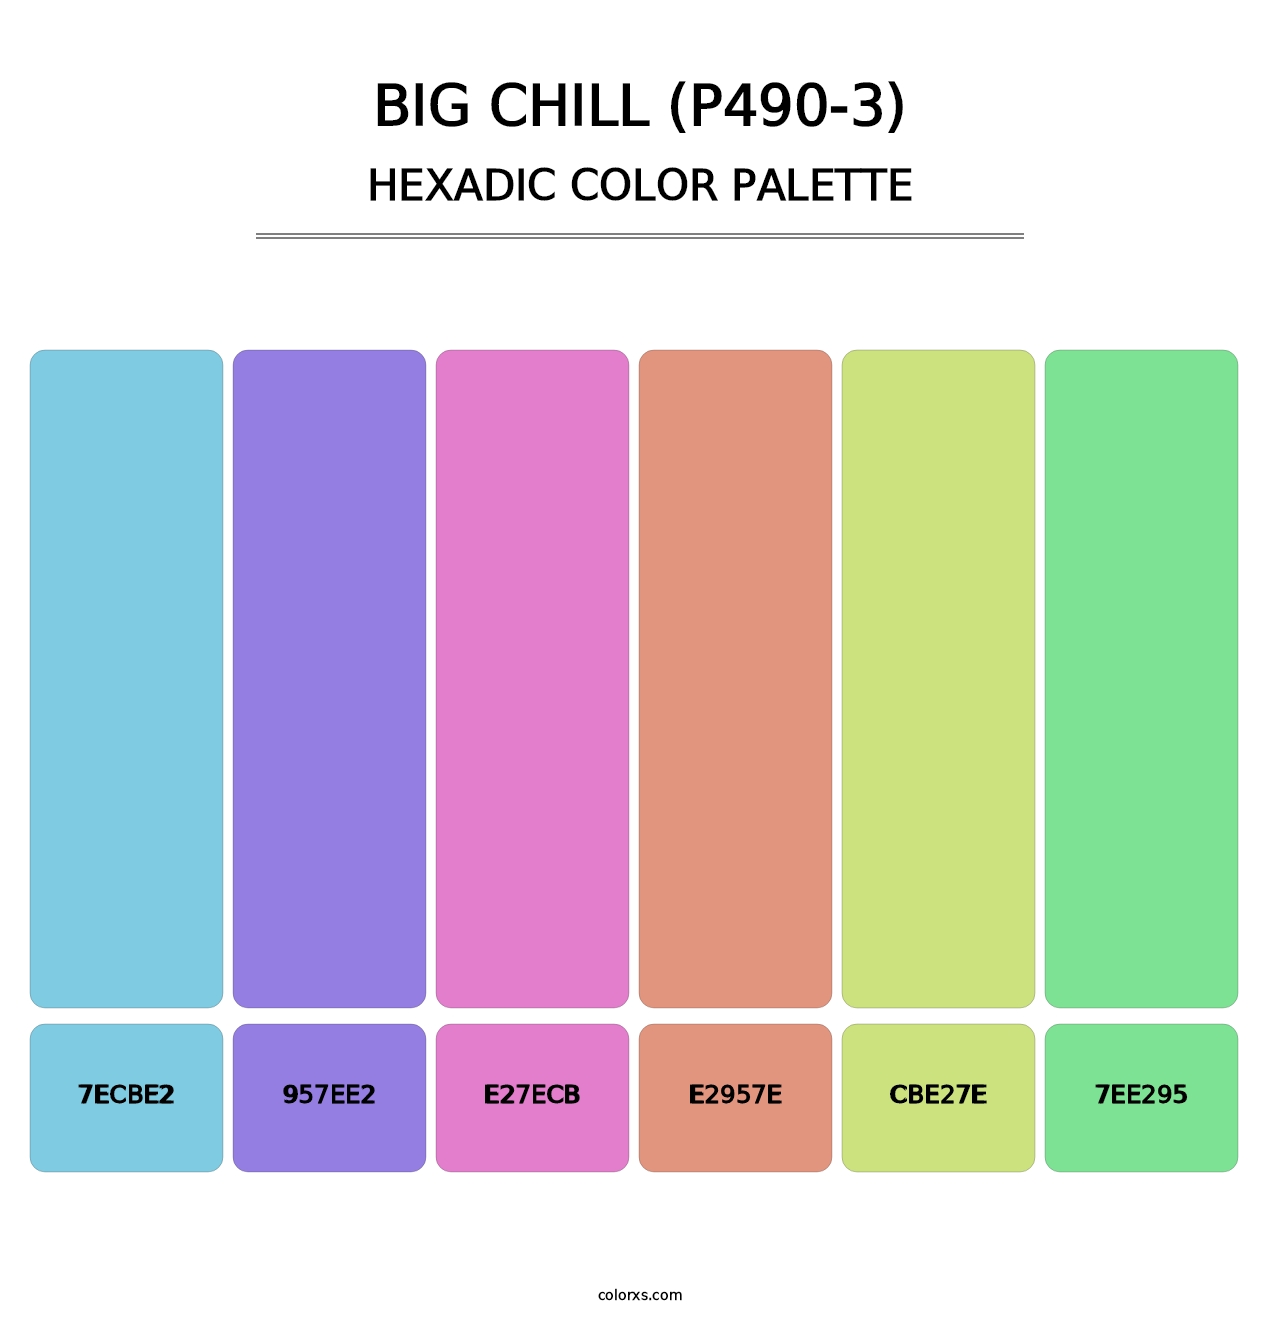 Big Chill (P490-3) - Hexadic Color Palette